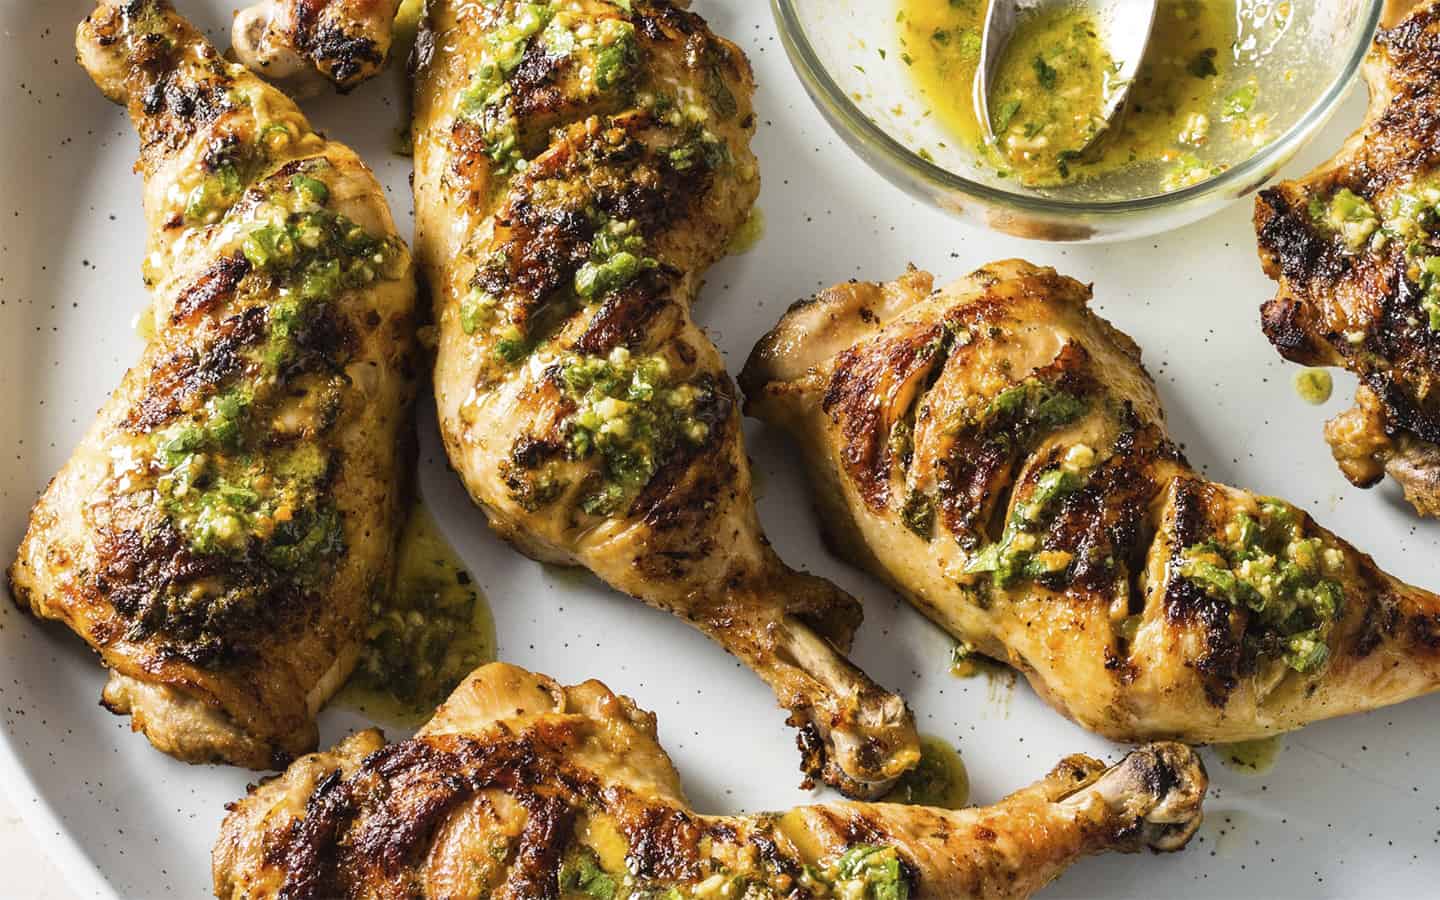 Grilled mojo chicken should be on your July Fourth menu